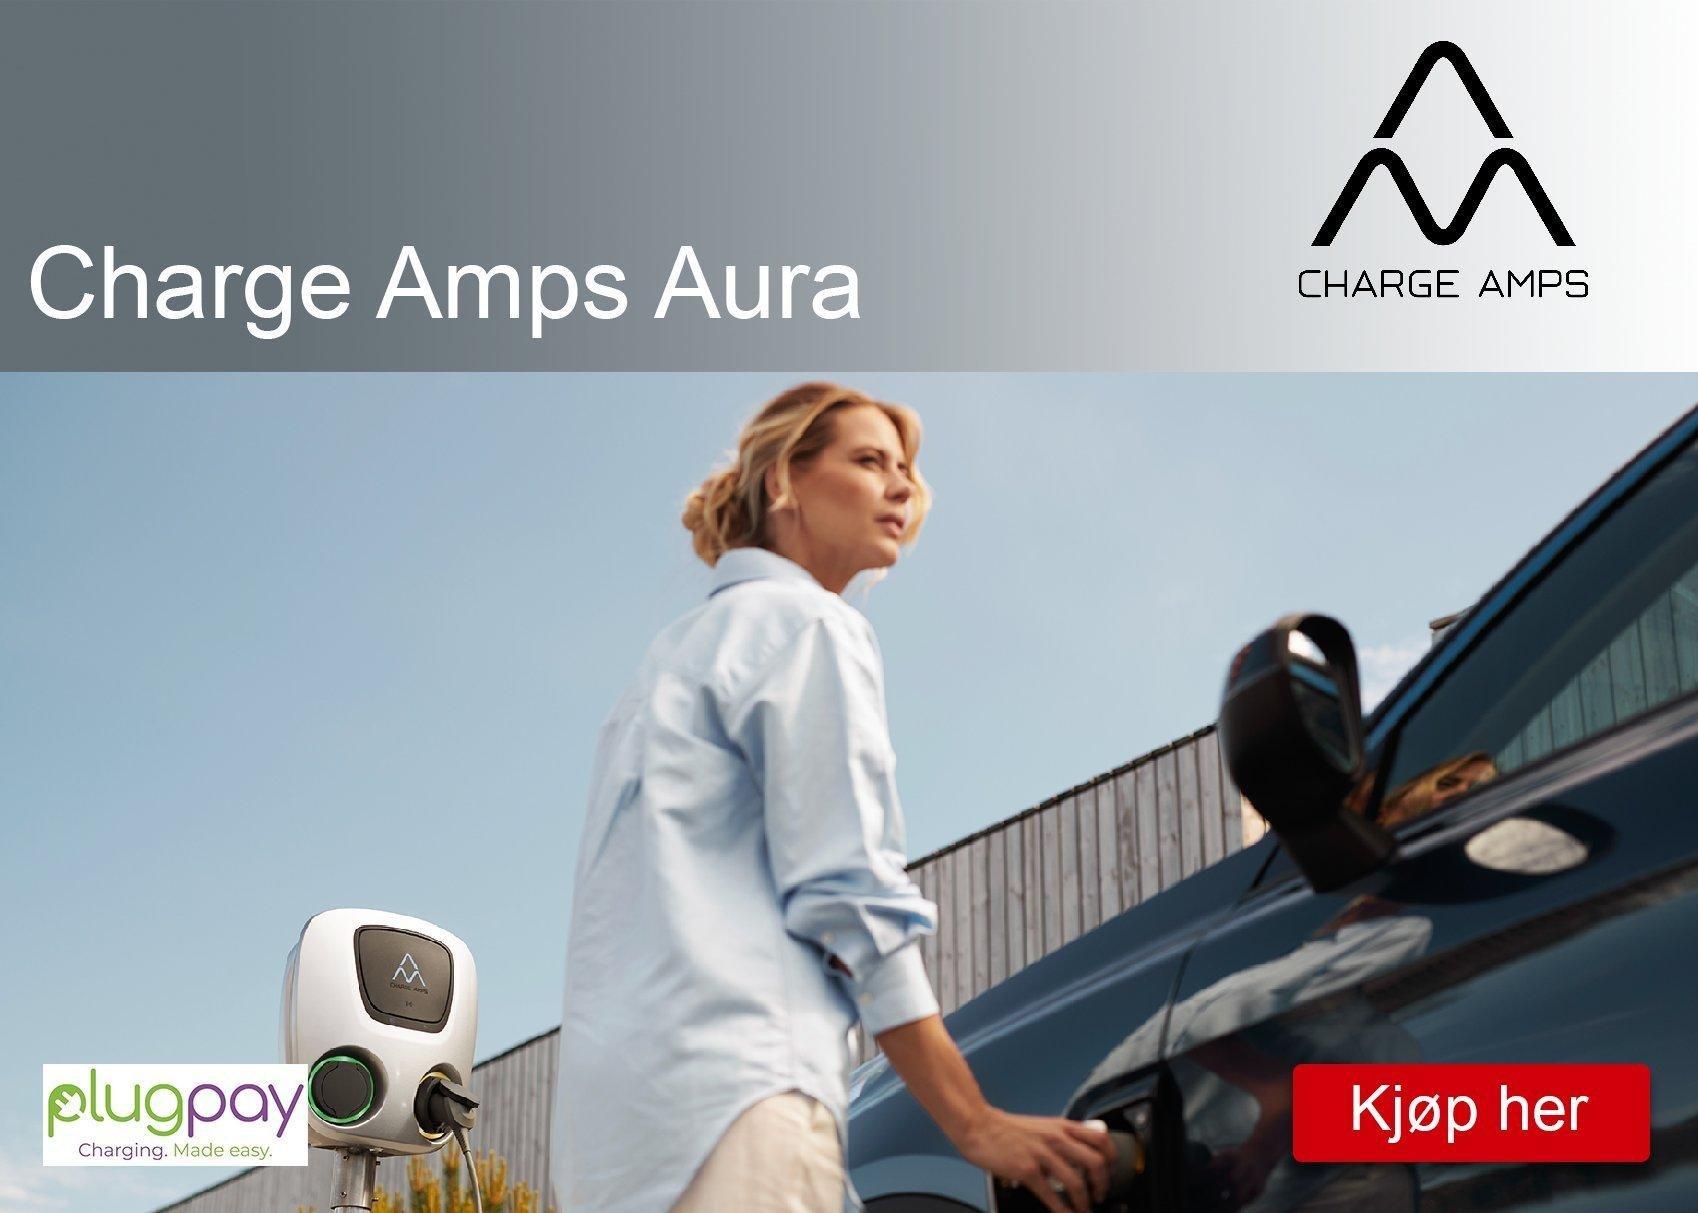 Charge Amps Aura